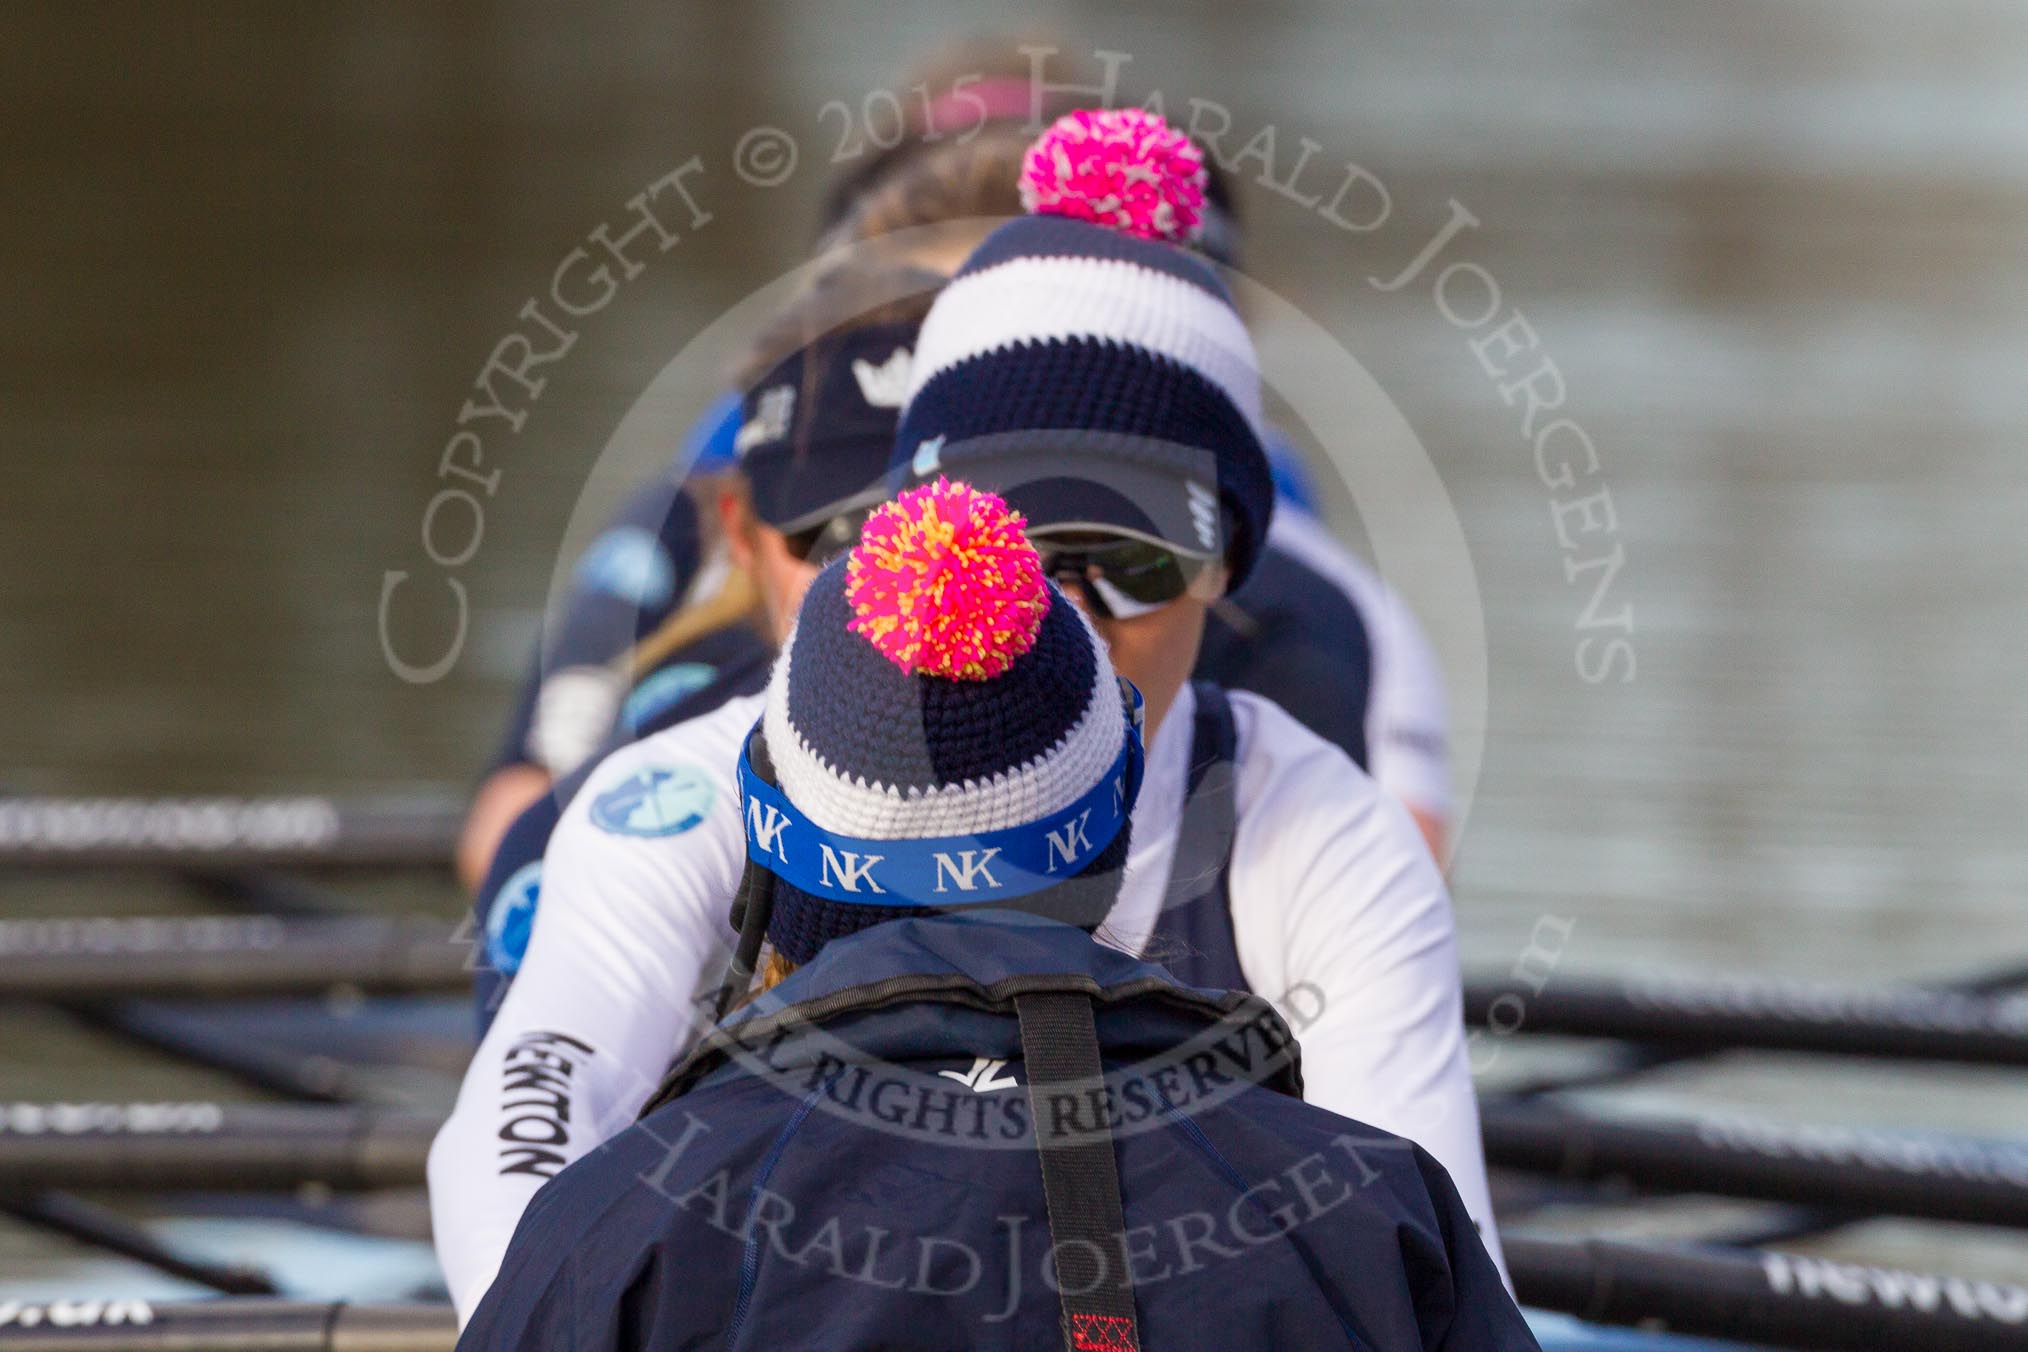 The Boat Race season 2015: OUWBC training Wallingford.

Wallingford,

United Kingdom,
on 04 March 2015 at 15:59, image #138